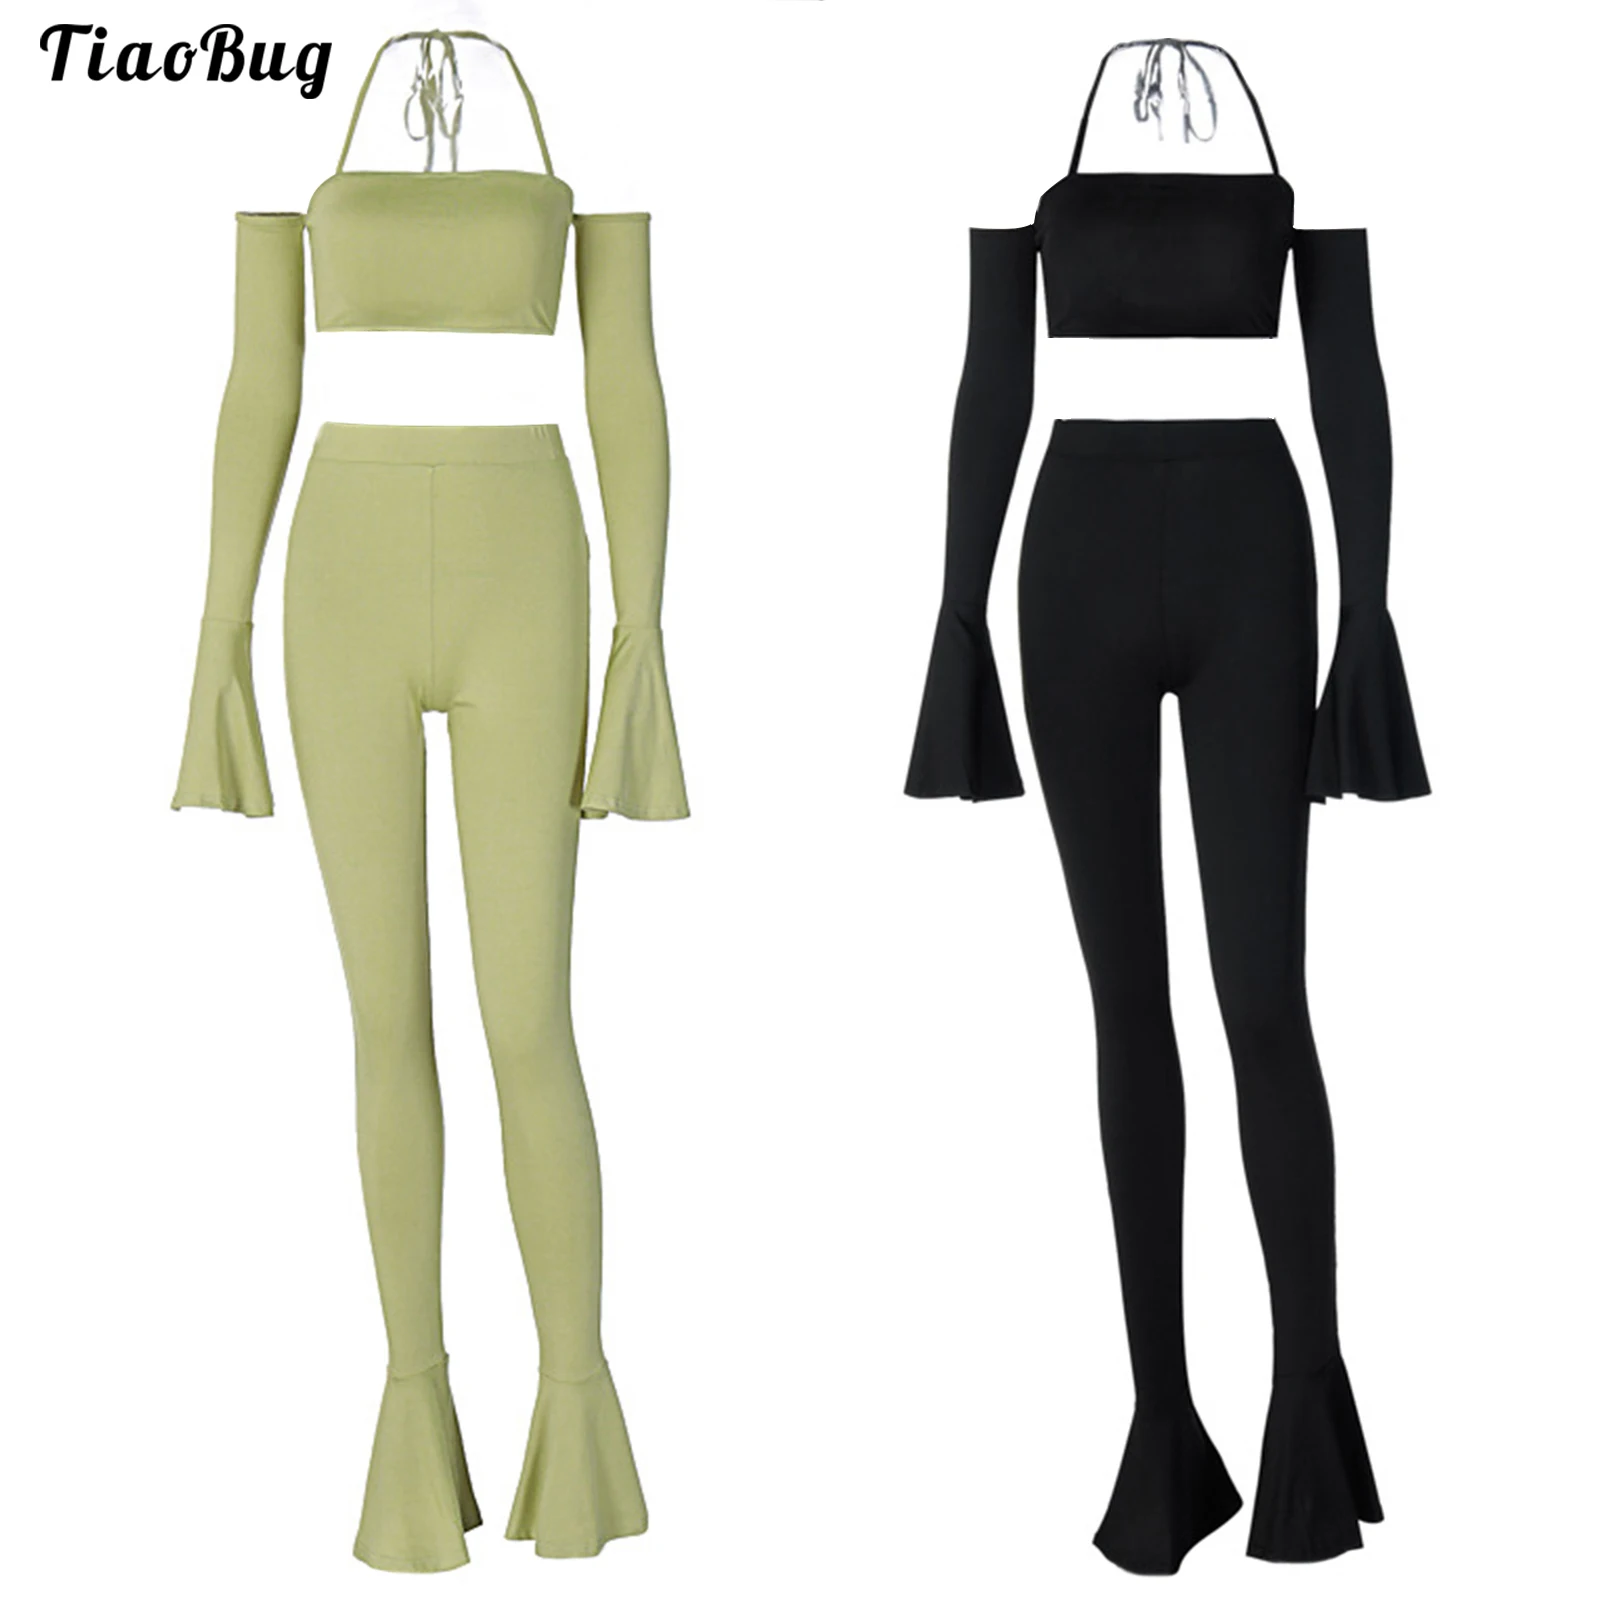 

Women 2Pcs Casual Suit Halter Neck Straps Long Sleeves Flared Sleeves Top With Flared Pants Trousers Set For Dance Jogging Yoga